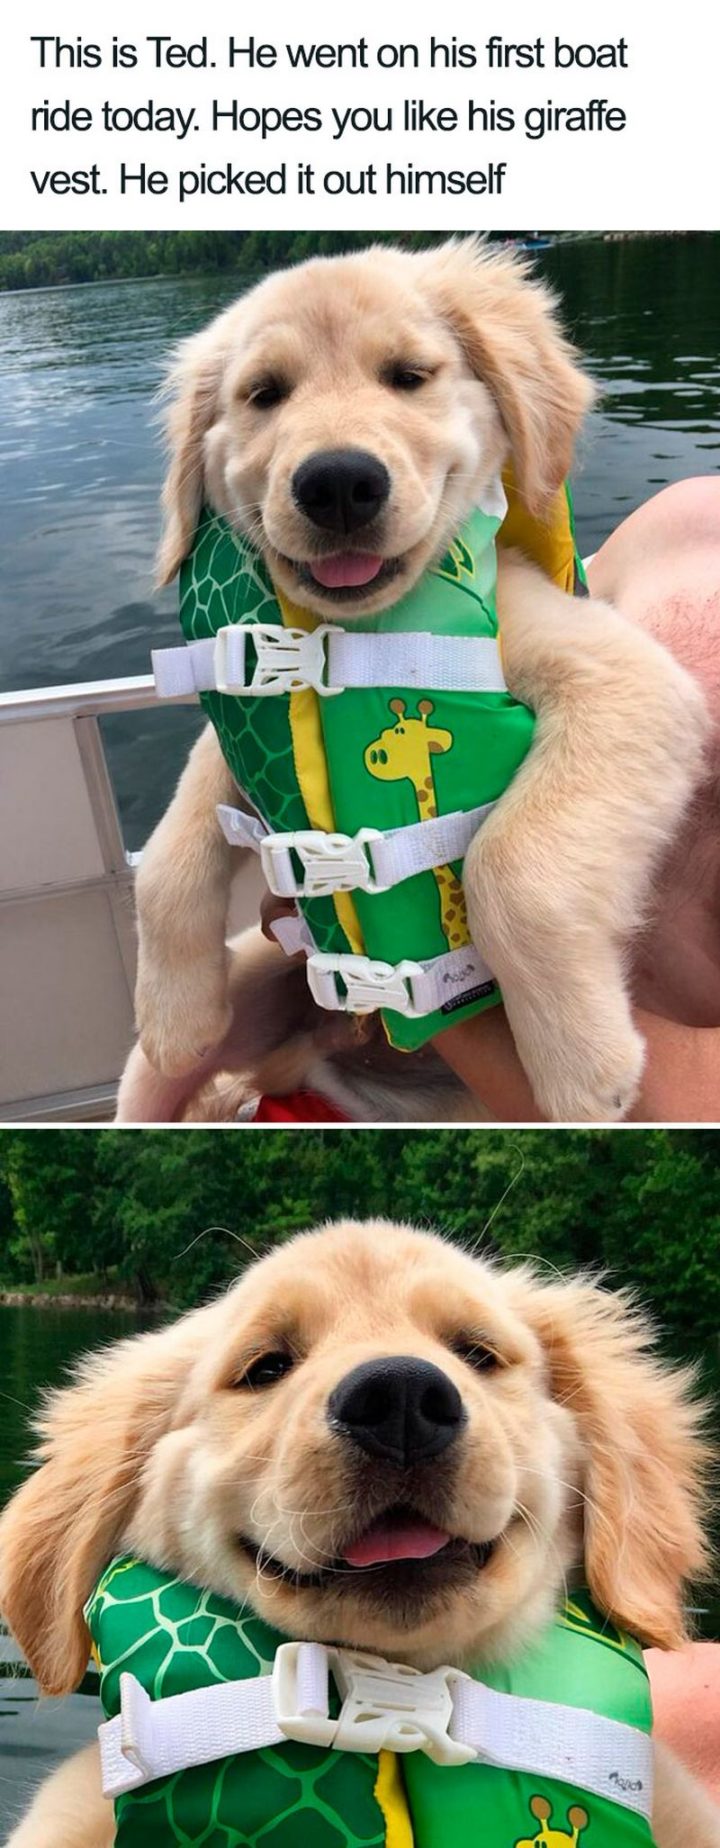 "This is Ted. He went on his first boat ride today. Hopes you like his giraffe vest. He picked it out himself."